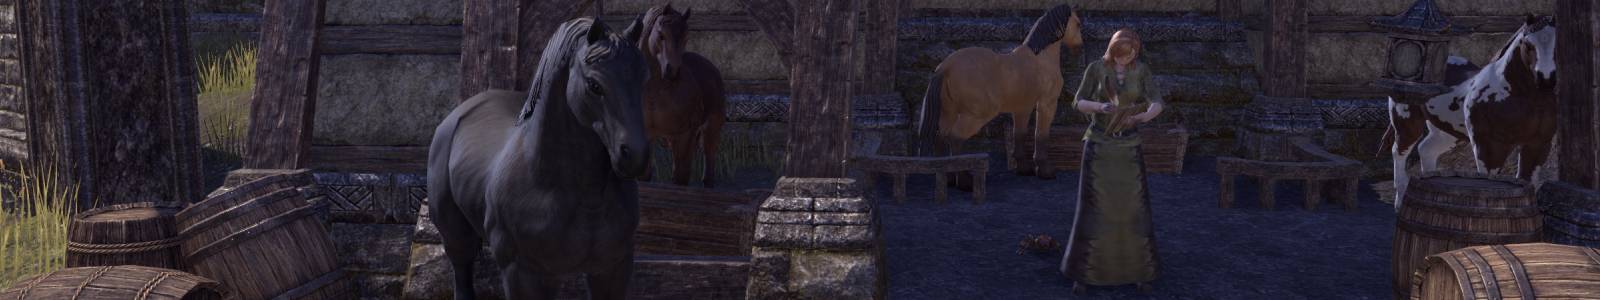 How to Obtain and Use a Mount in ESO - Elder Scrolls Online